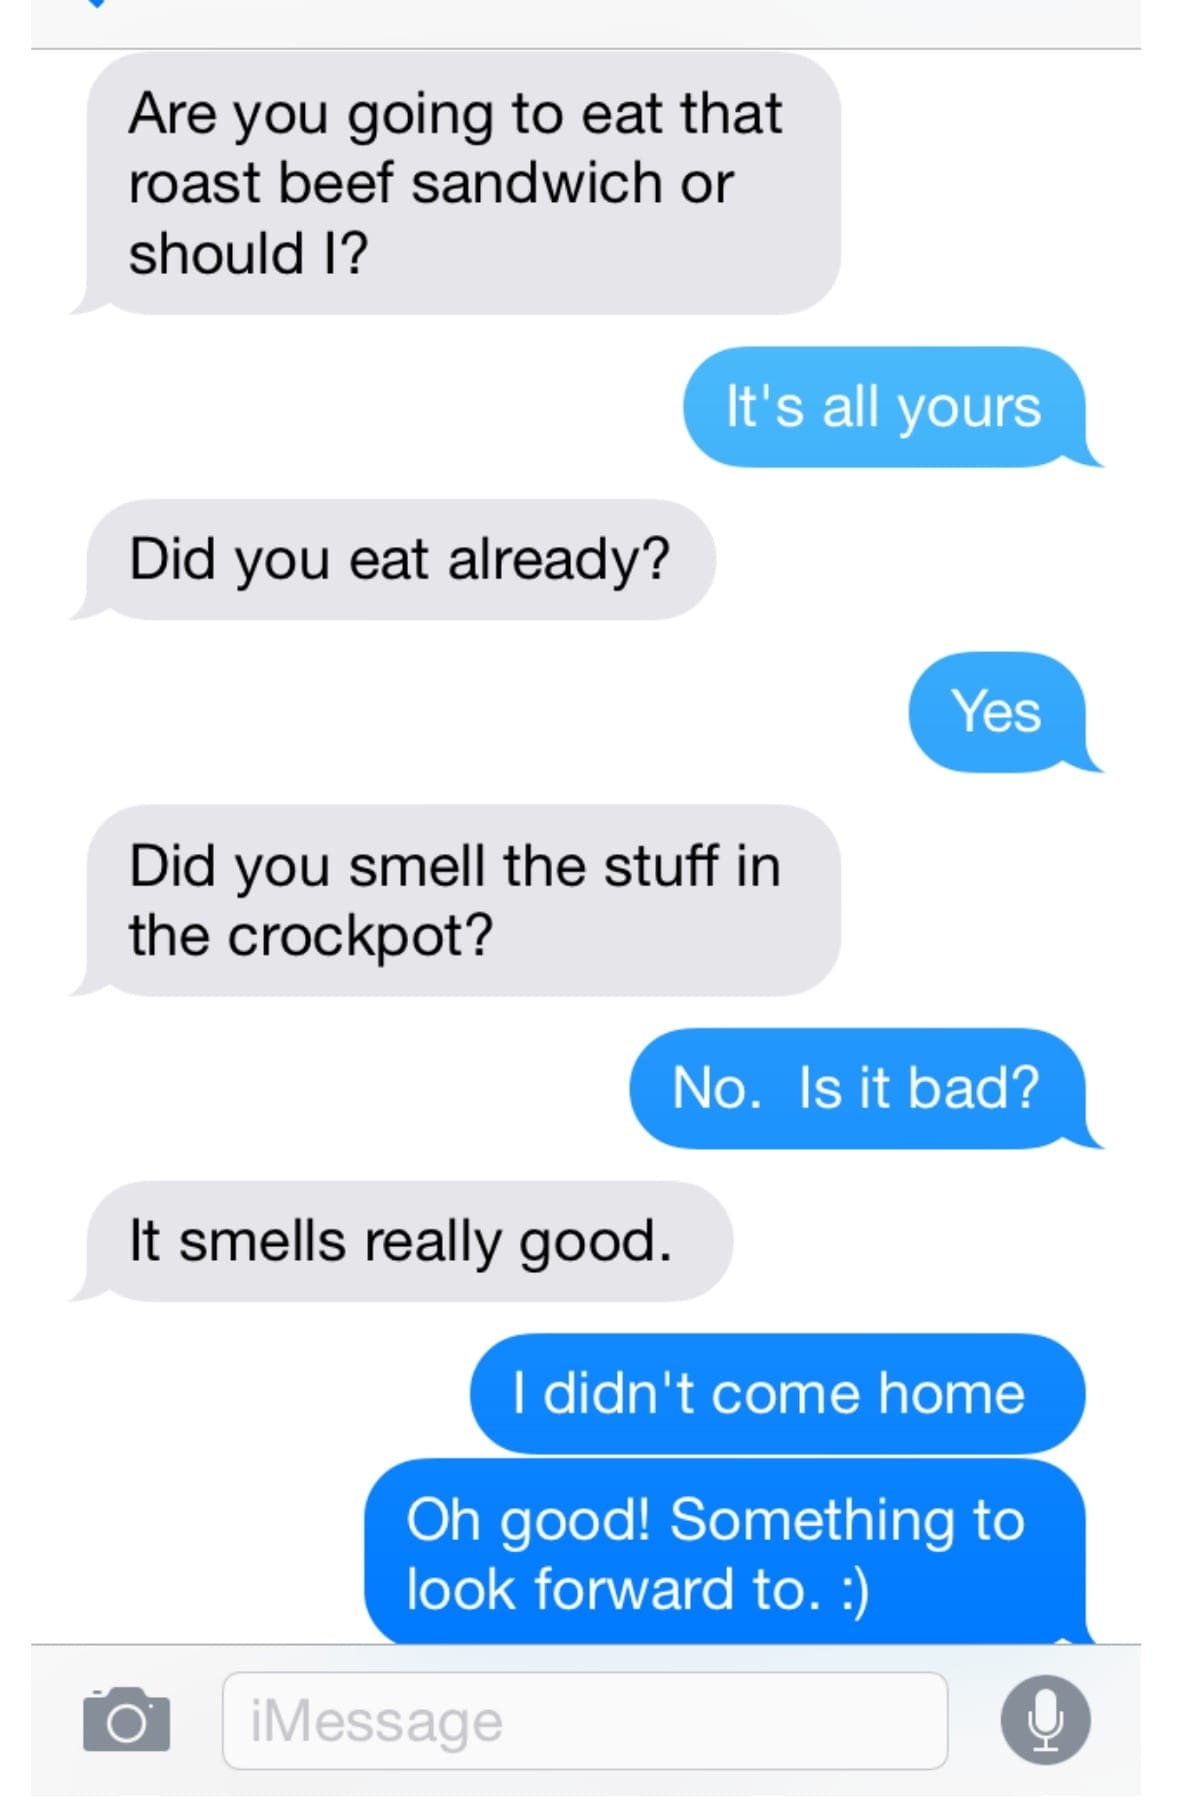 conversation with scott on text